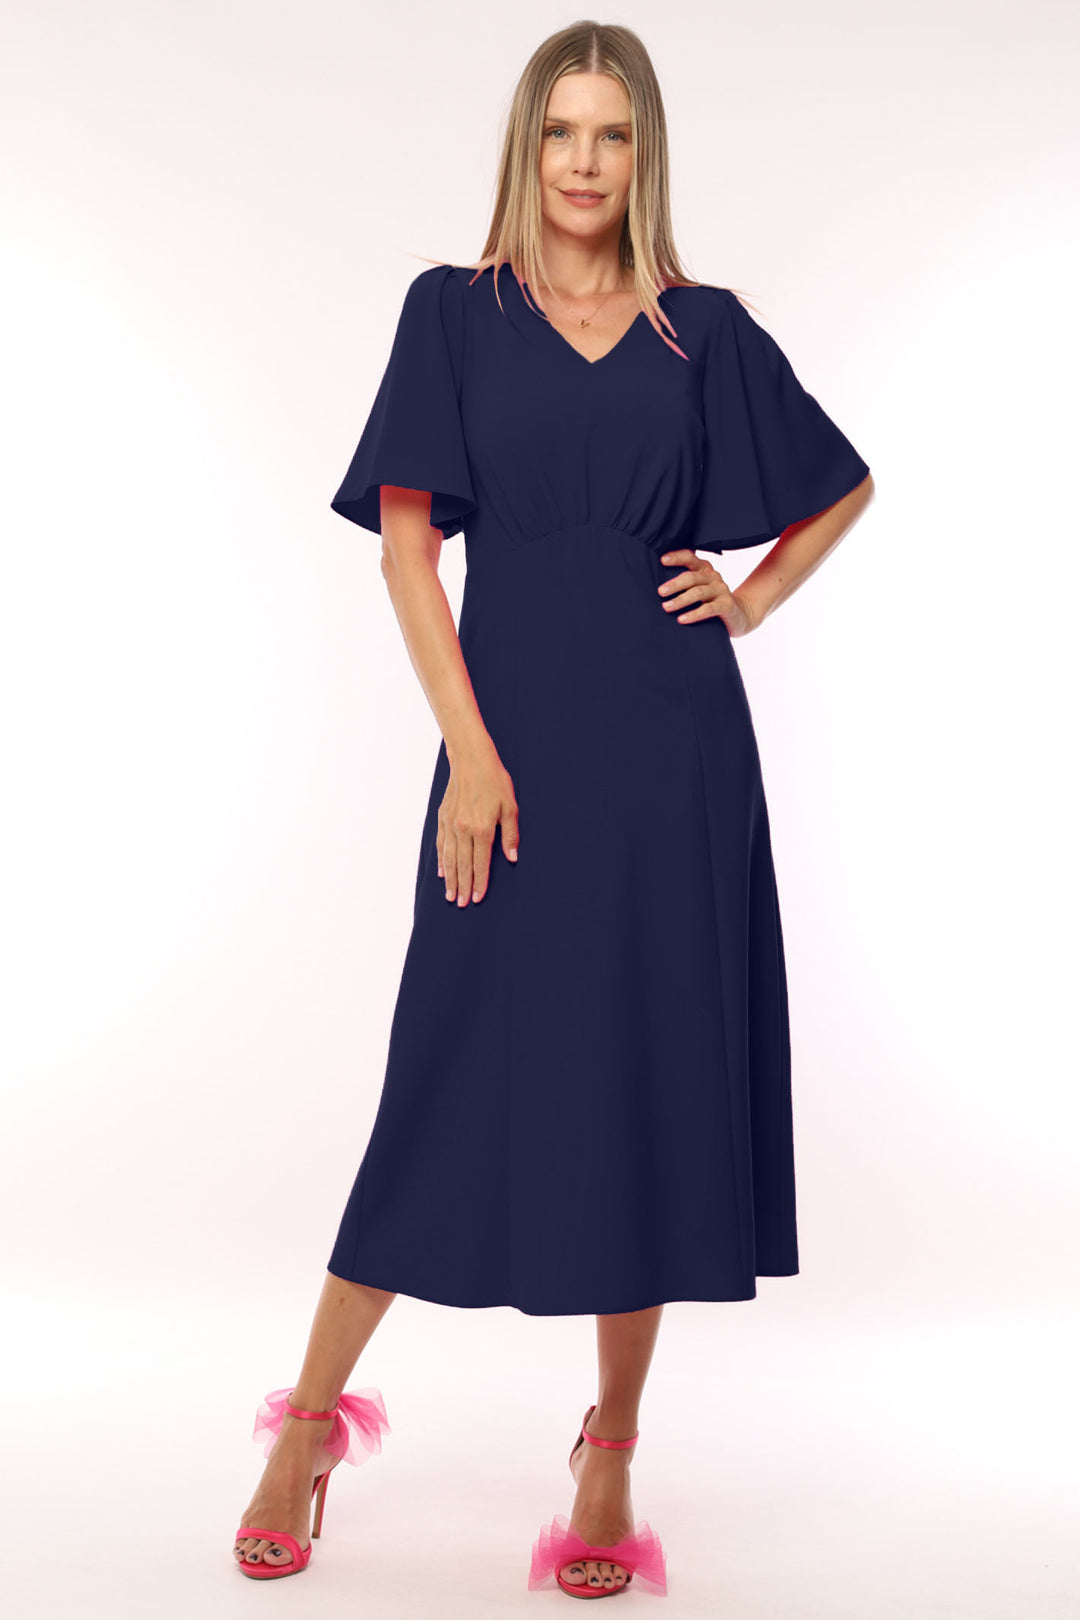 Ella Boo 2309-40 Navy V-Neck Bell Sleeve Midi Occasion Dress - Rouge Boutique Inverness